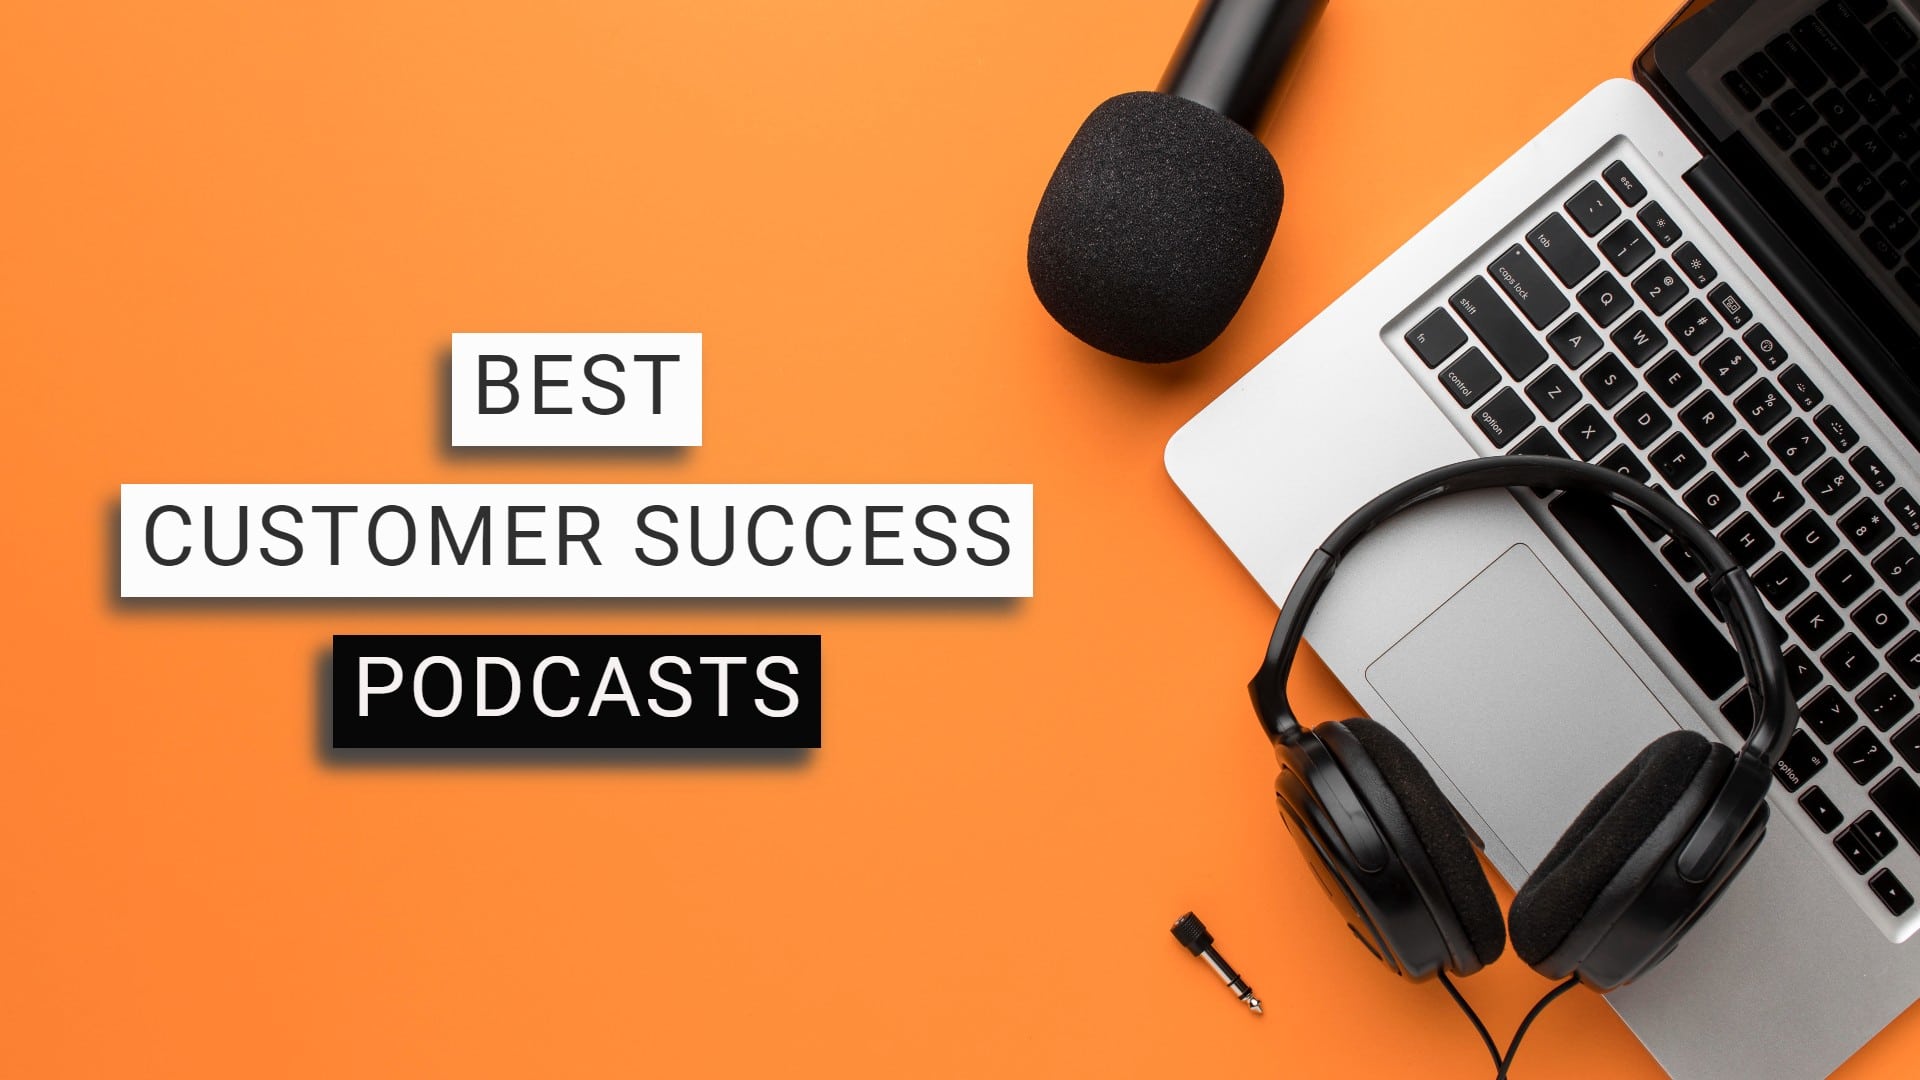 The 13 Best Customer Success Podcasts to Grow Your Career | 2022 List